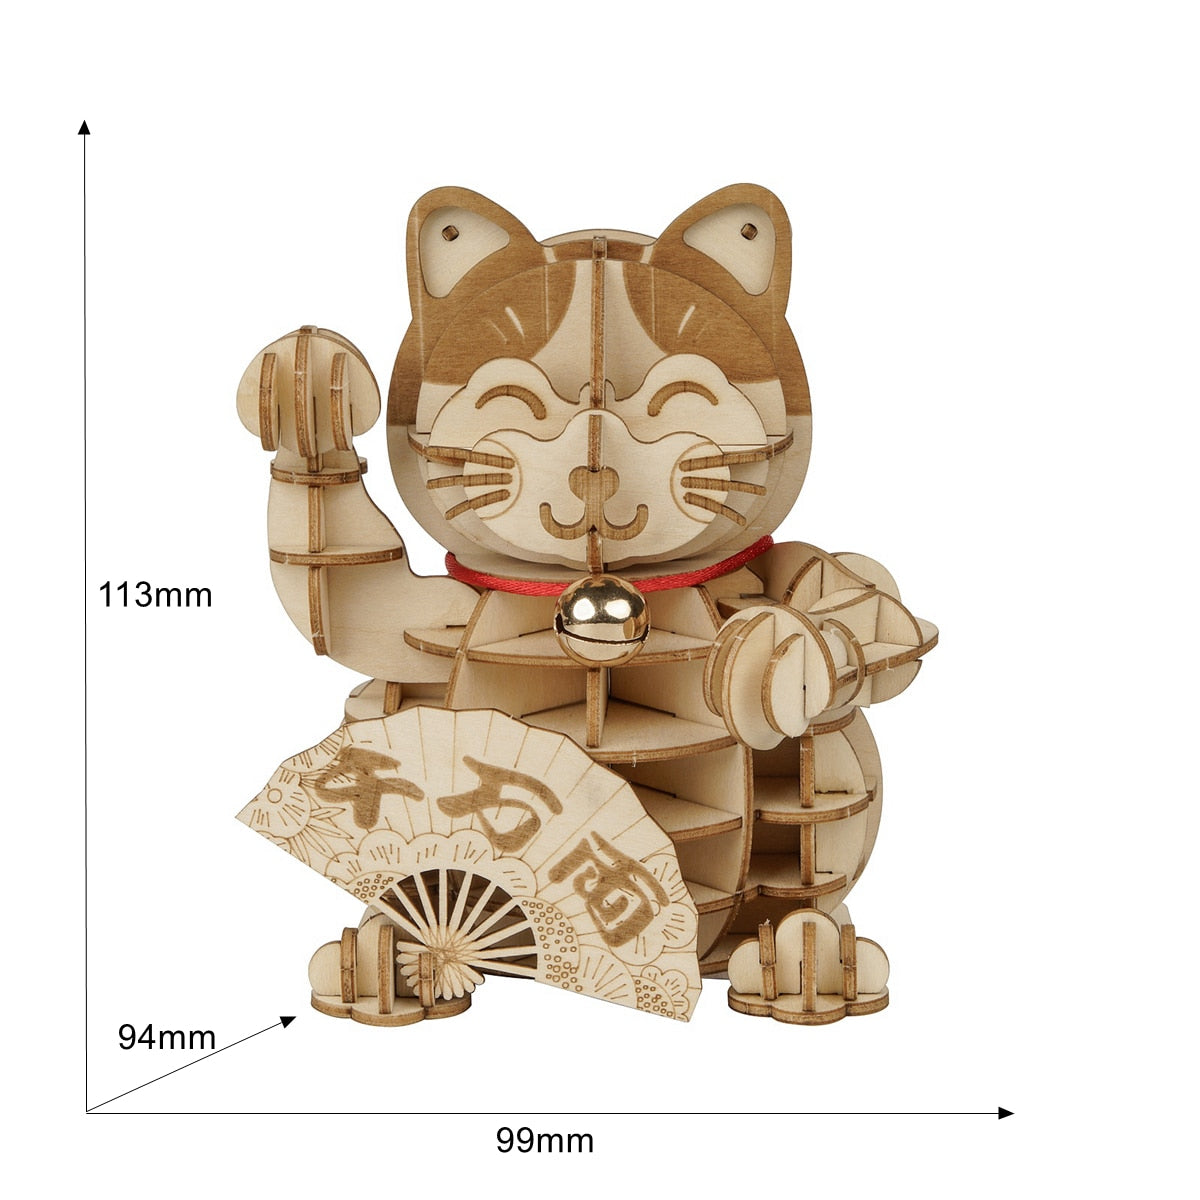 Diy Plutus Cat 3D Wooden Puzzle Kit Assembly Toy Present